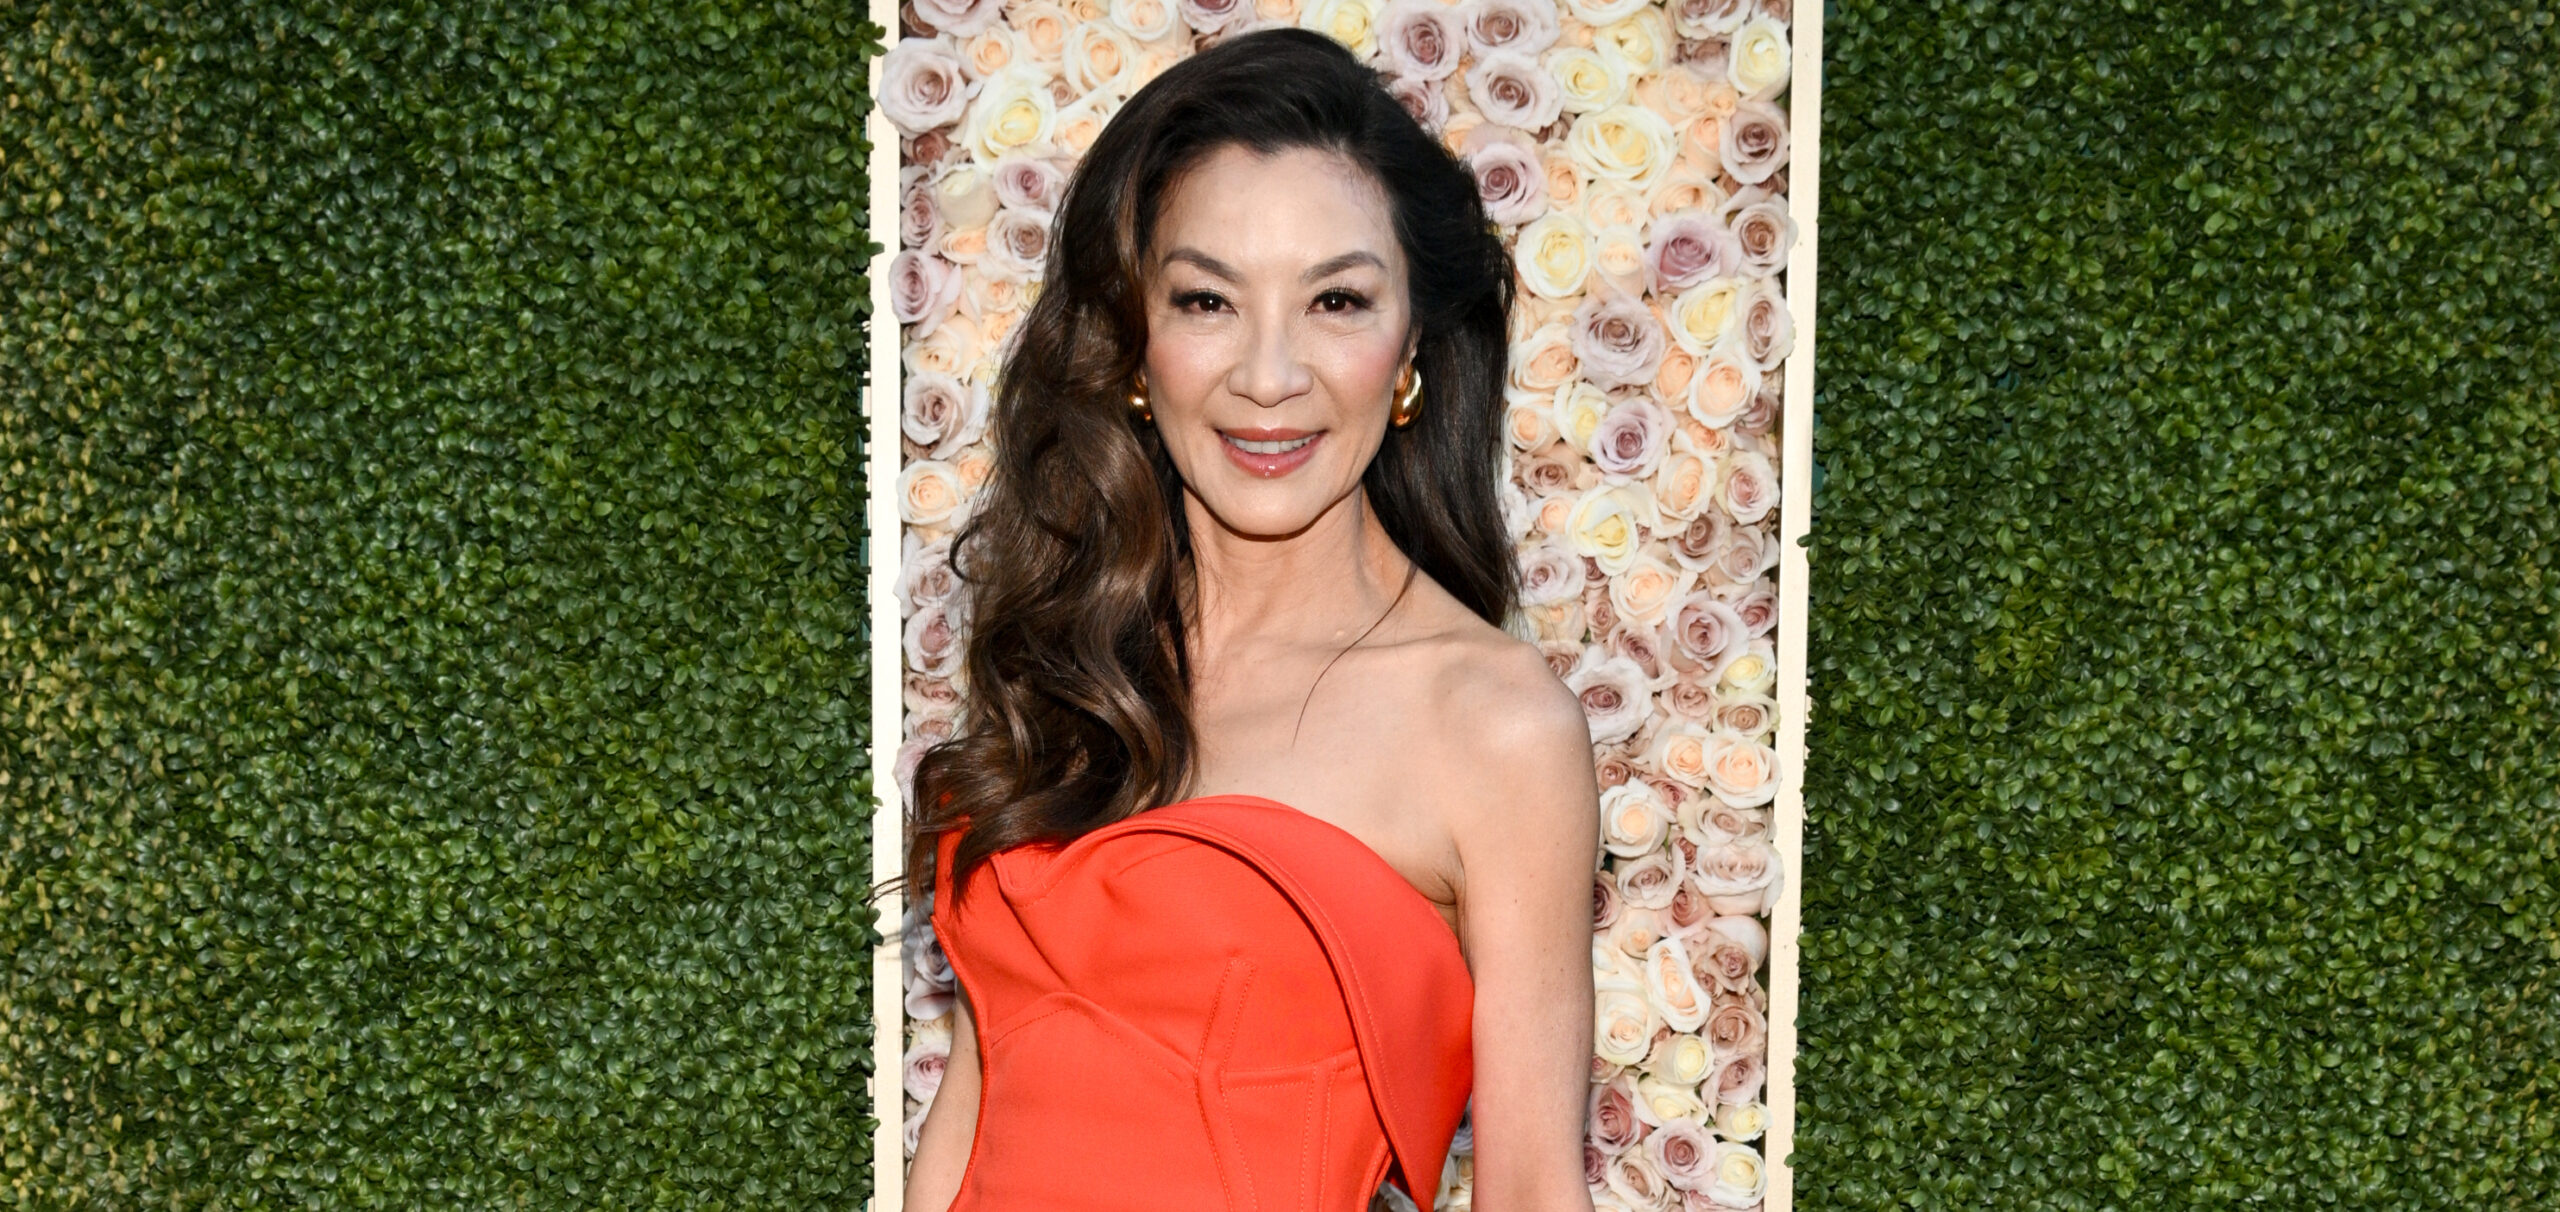 Michelle Yeoh graces the Golden Globe Awards in a stunning red strapless gown that speaks to her elegant poise. The gown's sleek silhouette gently traces her form, finishing with a subtle flair near the hem. Her ensemble is accessorized with a multi-colored, structured clutch and silver pointed heels, adding a playful yet sophisticated touch to her look. Her hair, swept back into a graceful style, showcases her warm smile and sparkling earrings, completing a picture of timeless beauty against the floral and verdant backdrop.